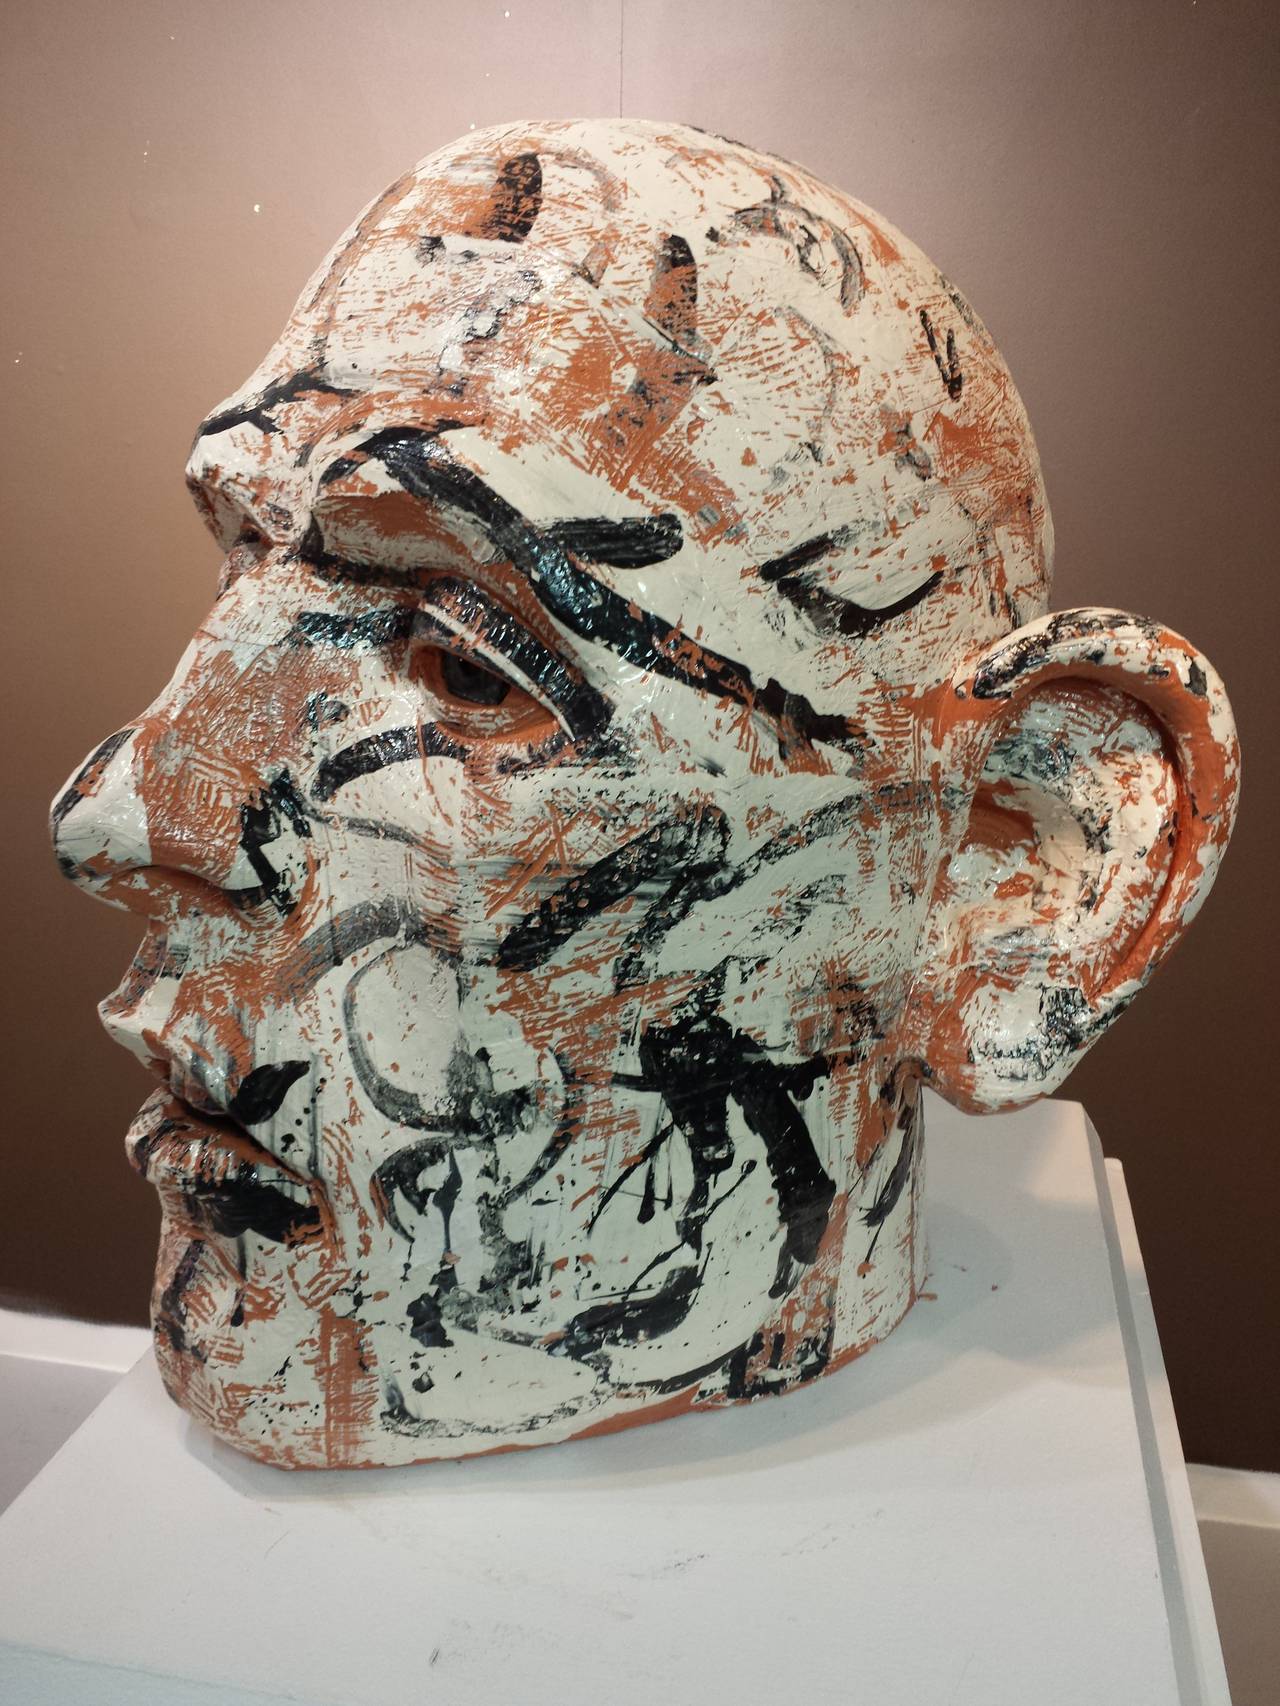 Terracotta with under glazes

EDUCATION:
1990 - BFA- College of Fine Arts, Boston University, Boston, MA

PROFESSIONAL EXPERIENCE:
PRESENT
STUDIO 740- ARTIST/ STUDIO MANAGER, Helena, MT
ASSISTANT CURATOR OF EDUCATION- HOLTER MUSEUM OF ART, Helena,